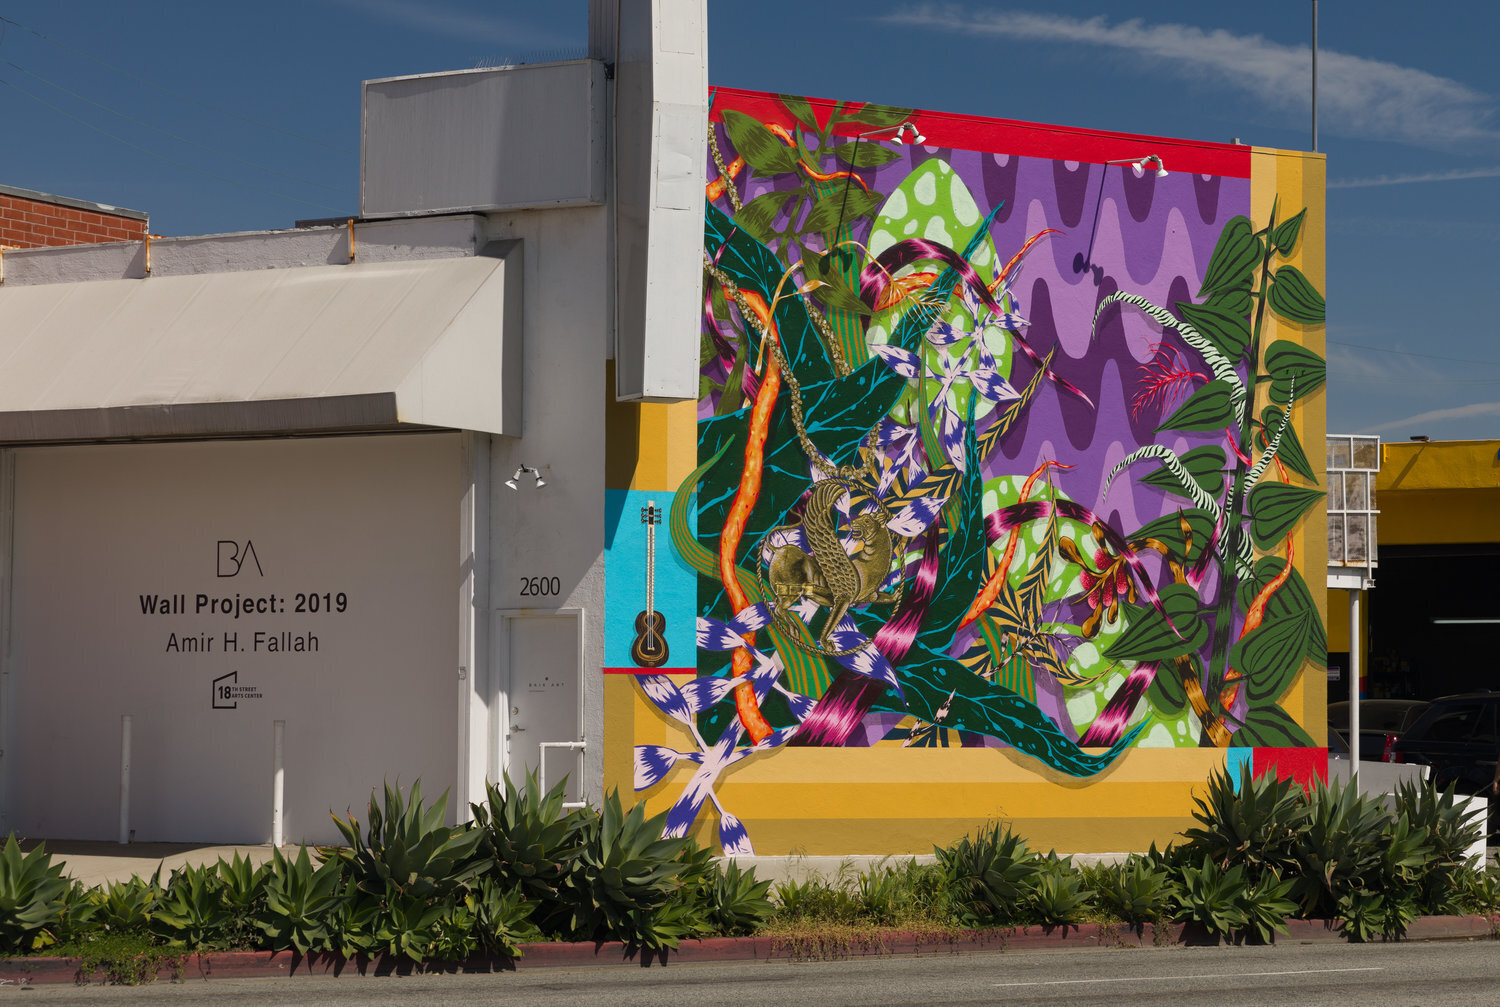 Mural of, Songs For My Father, Boquets For My Mother, Amir H. Fallah, Baik Art, 2019, 4.jpg